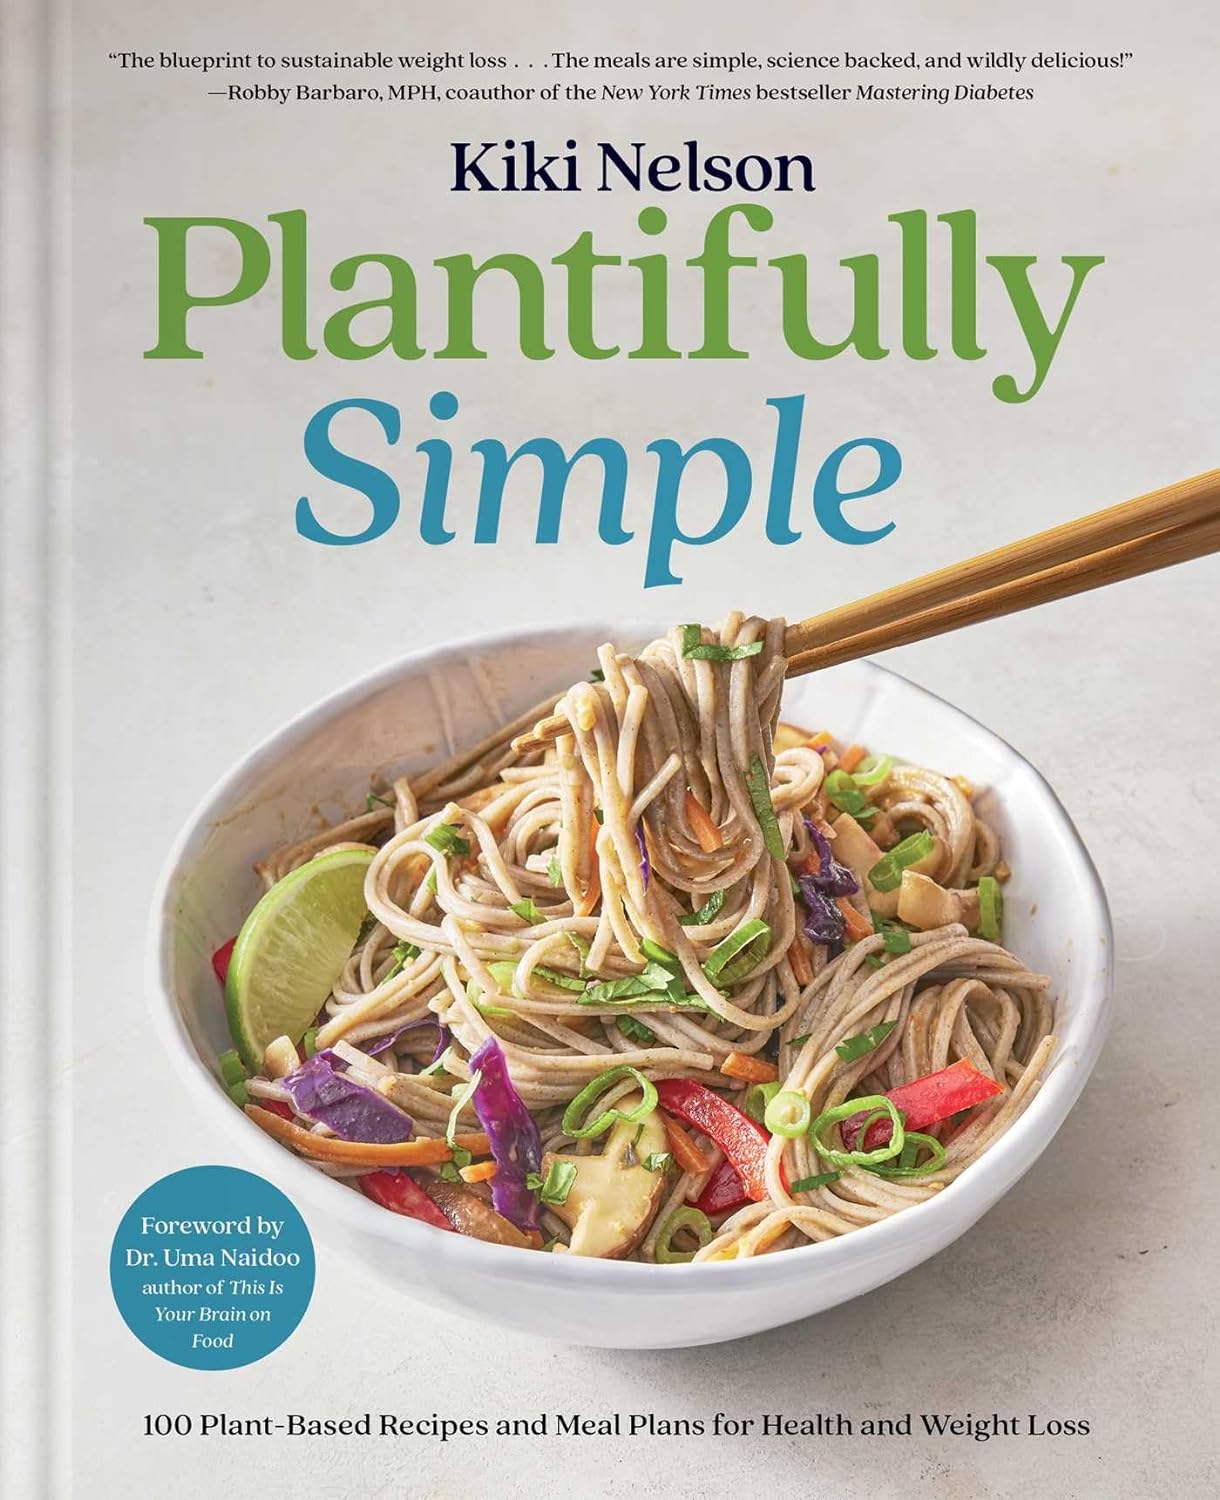 Plantifully Simple: 100 Plant-Based Recipes and Meal Plans for Health and Weight-Loss